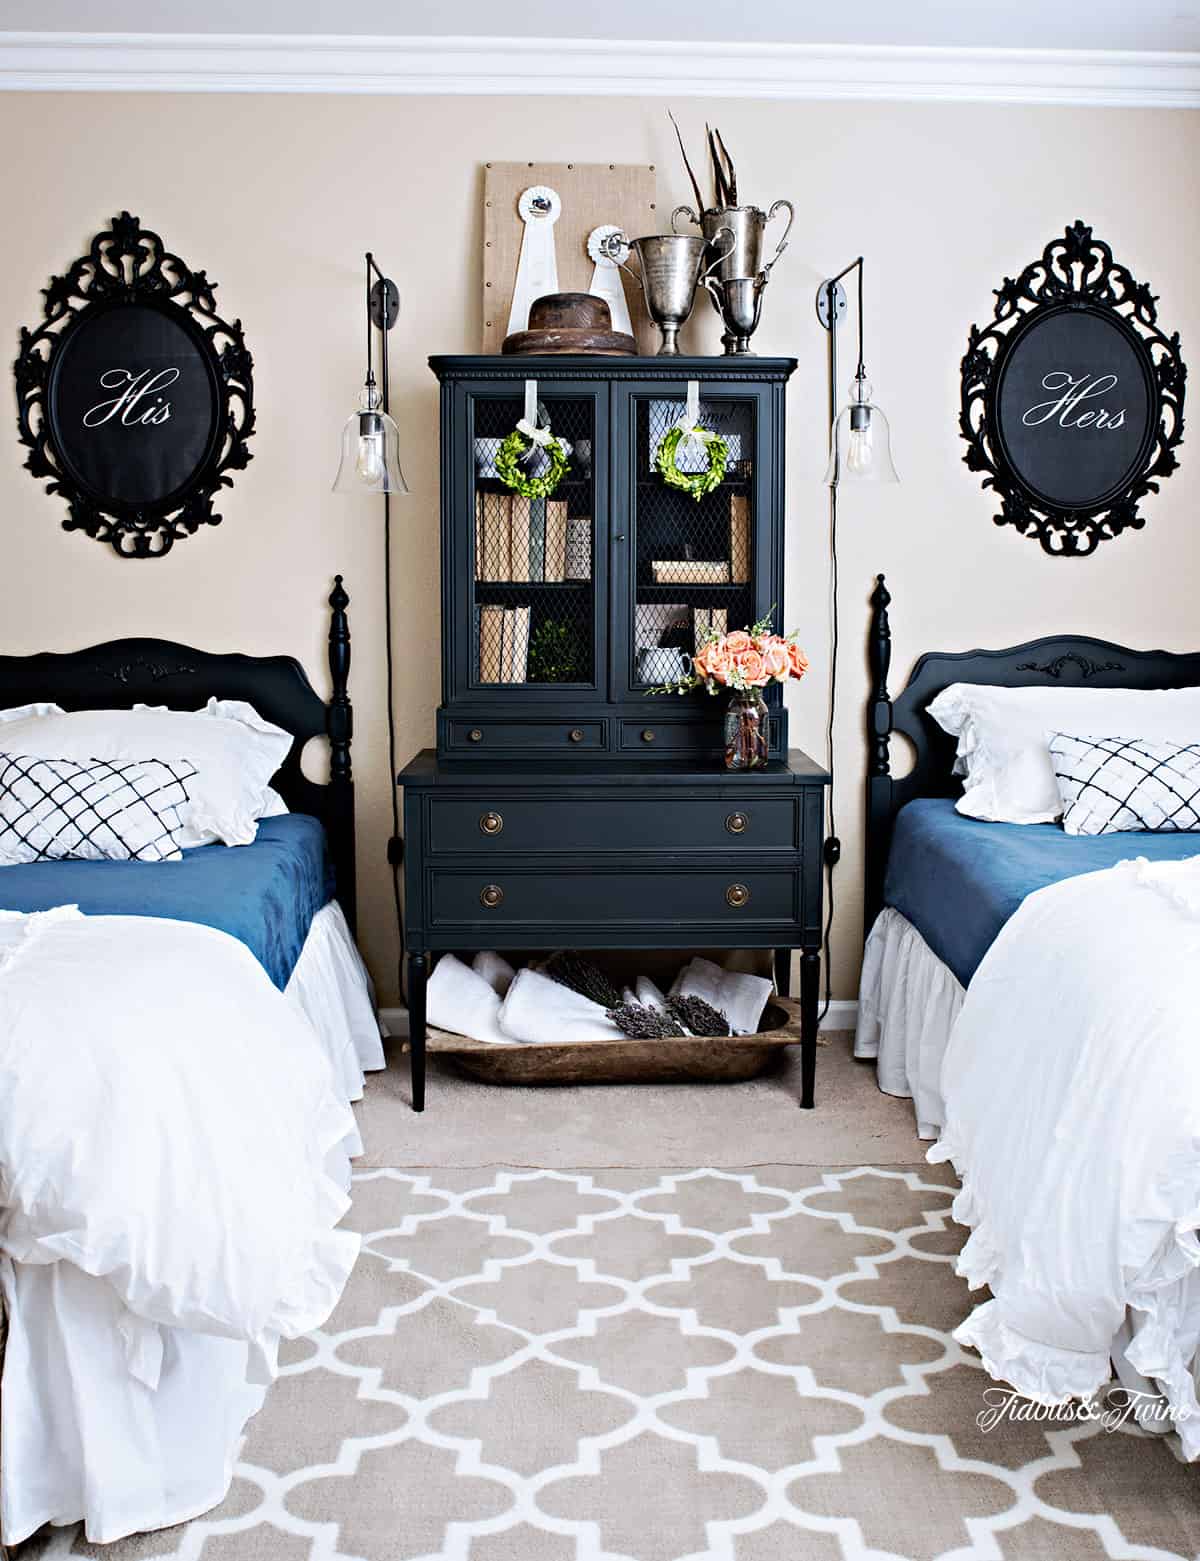 Antique double guest bedroom with black hutch and vintage decorations.